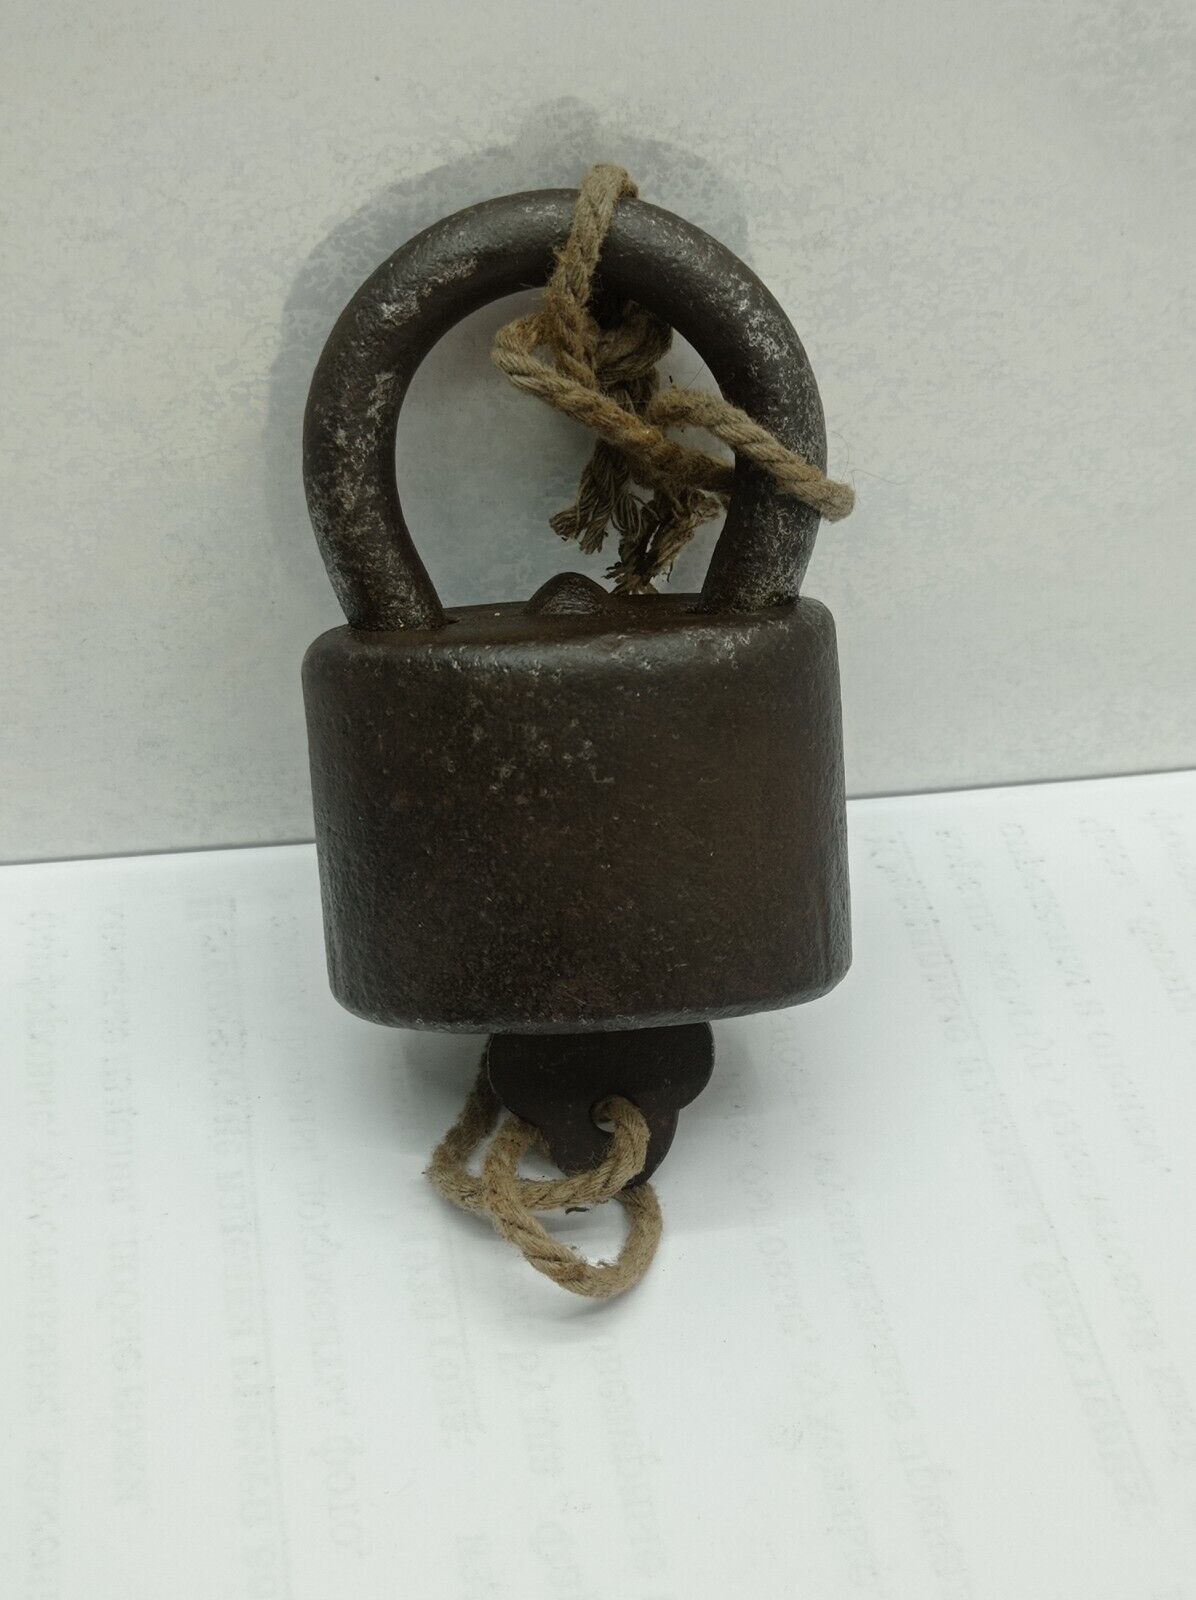 Vintage Tsarist Russia Padlock One Key Works Well Good Condition